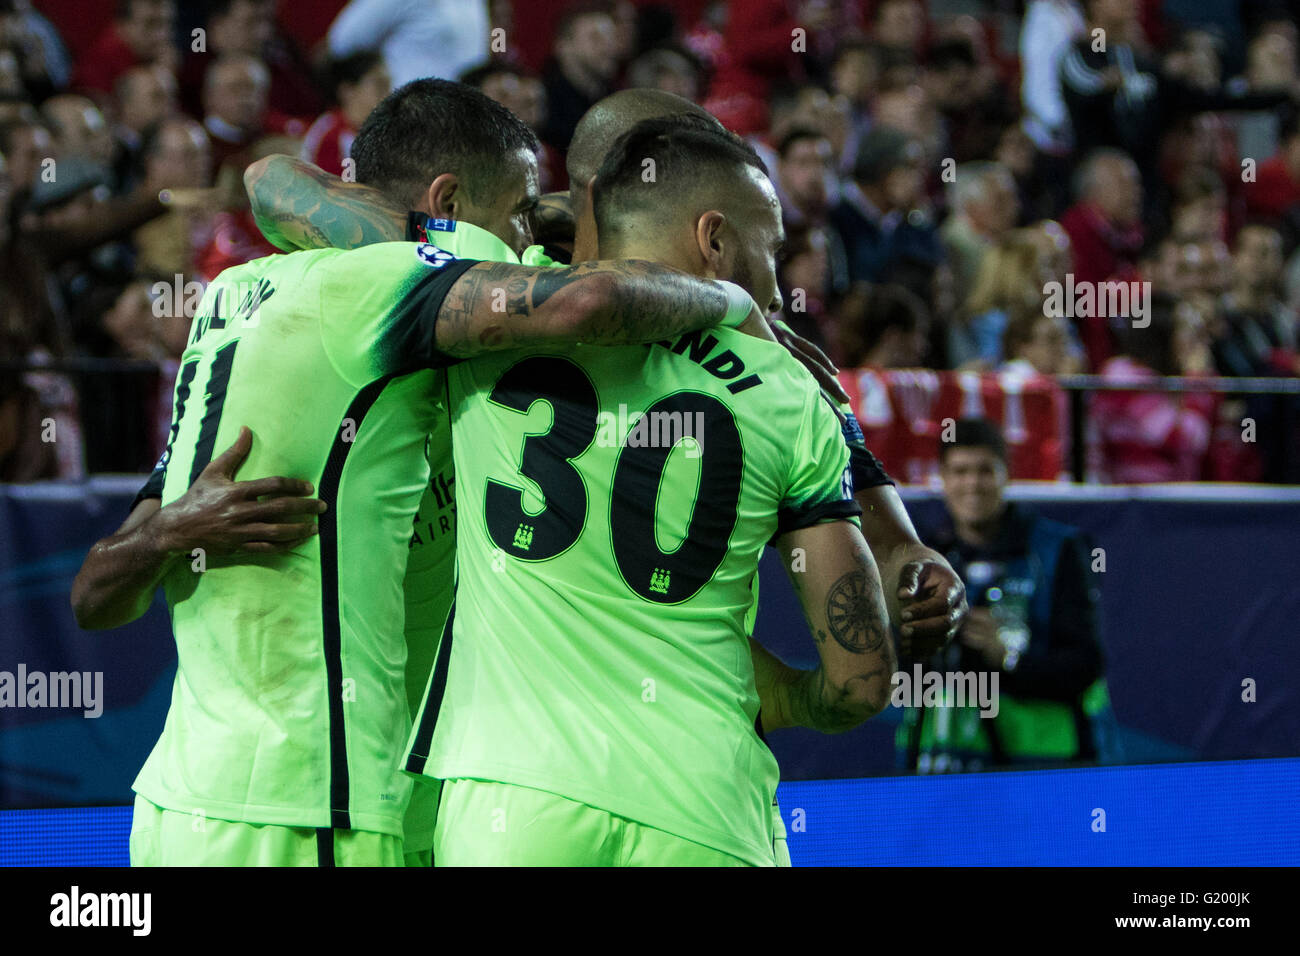 Players of Manchester City celebrates after scoring during the UEFA Champions League Group D soccer match between Sevilla FC and Manchester City at Estadio Ramon Sanchez Pizjuan in Sevilla, Spain, 3 November, 2015 Stock Photo